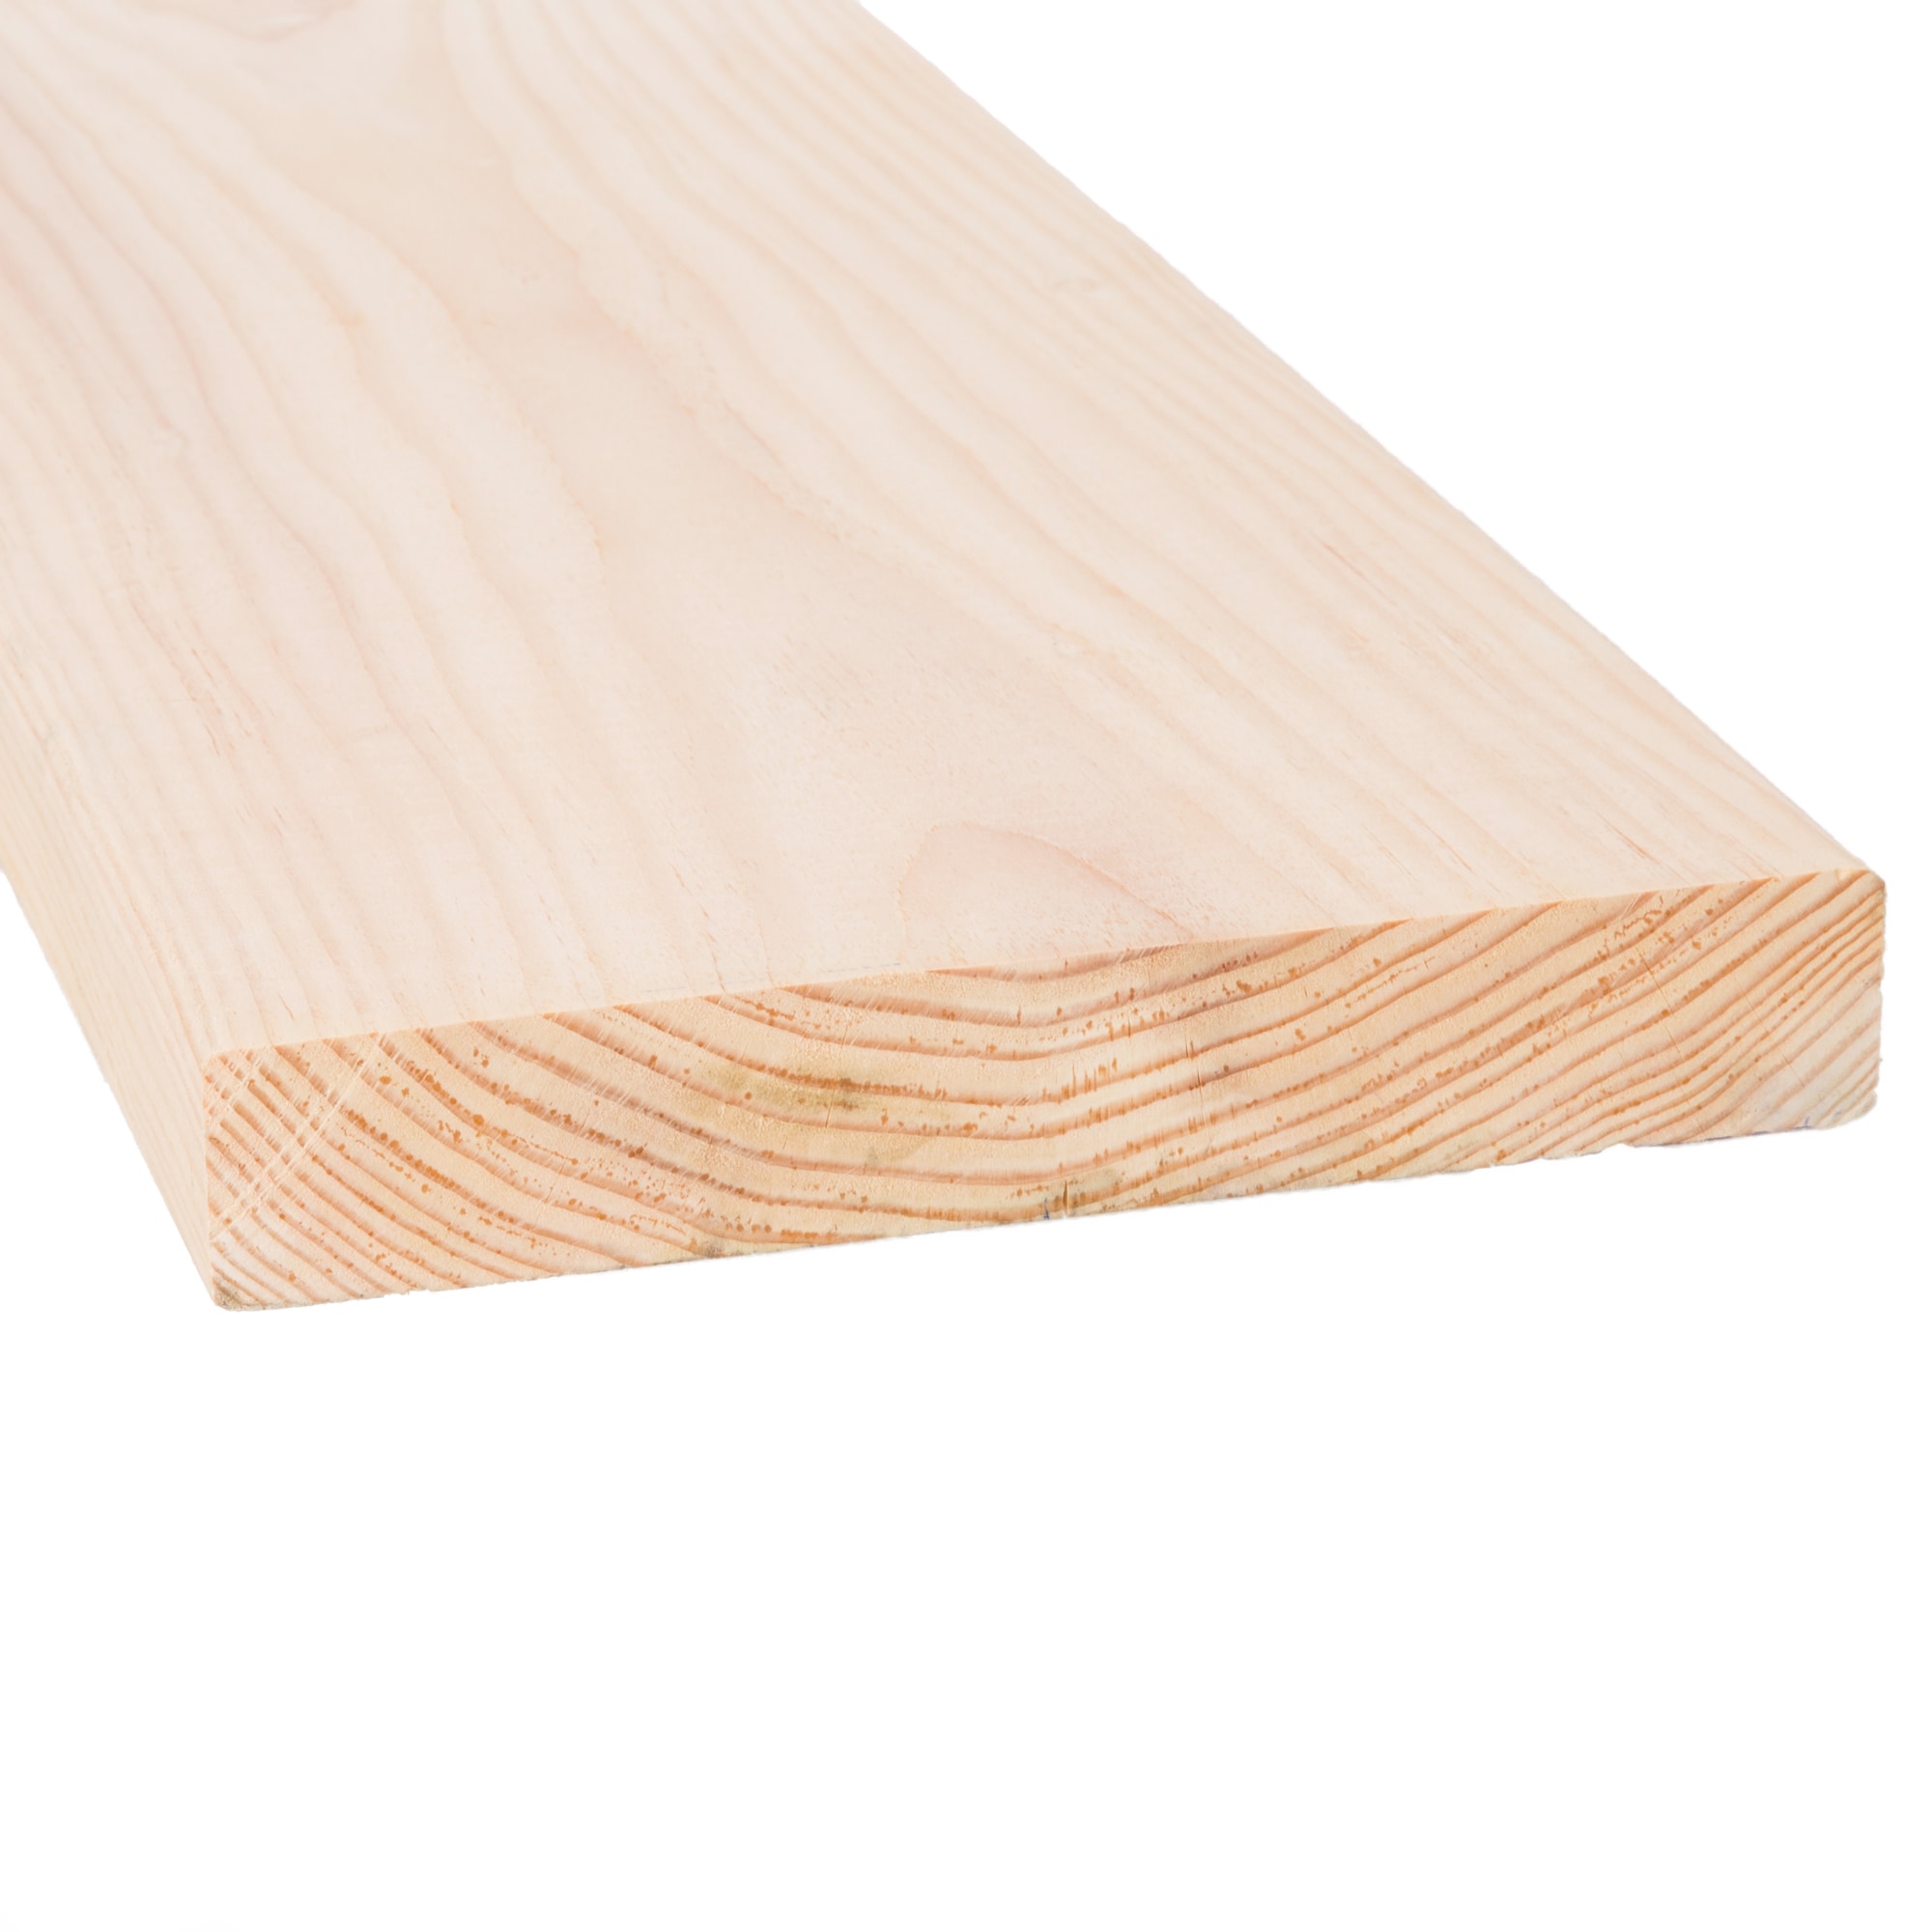 2-in x 10-in Dimensional Lumber at